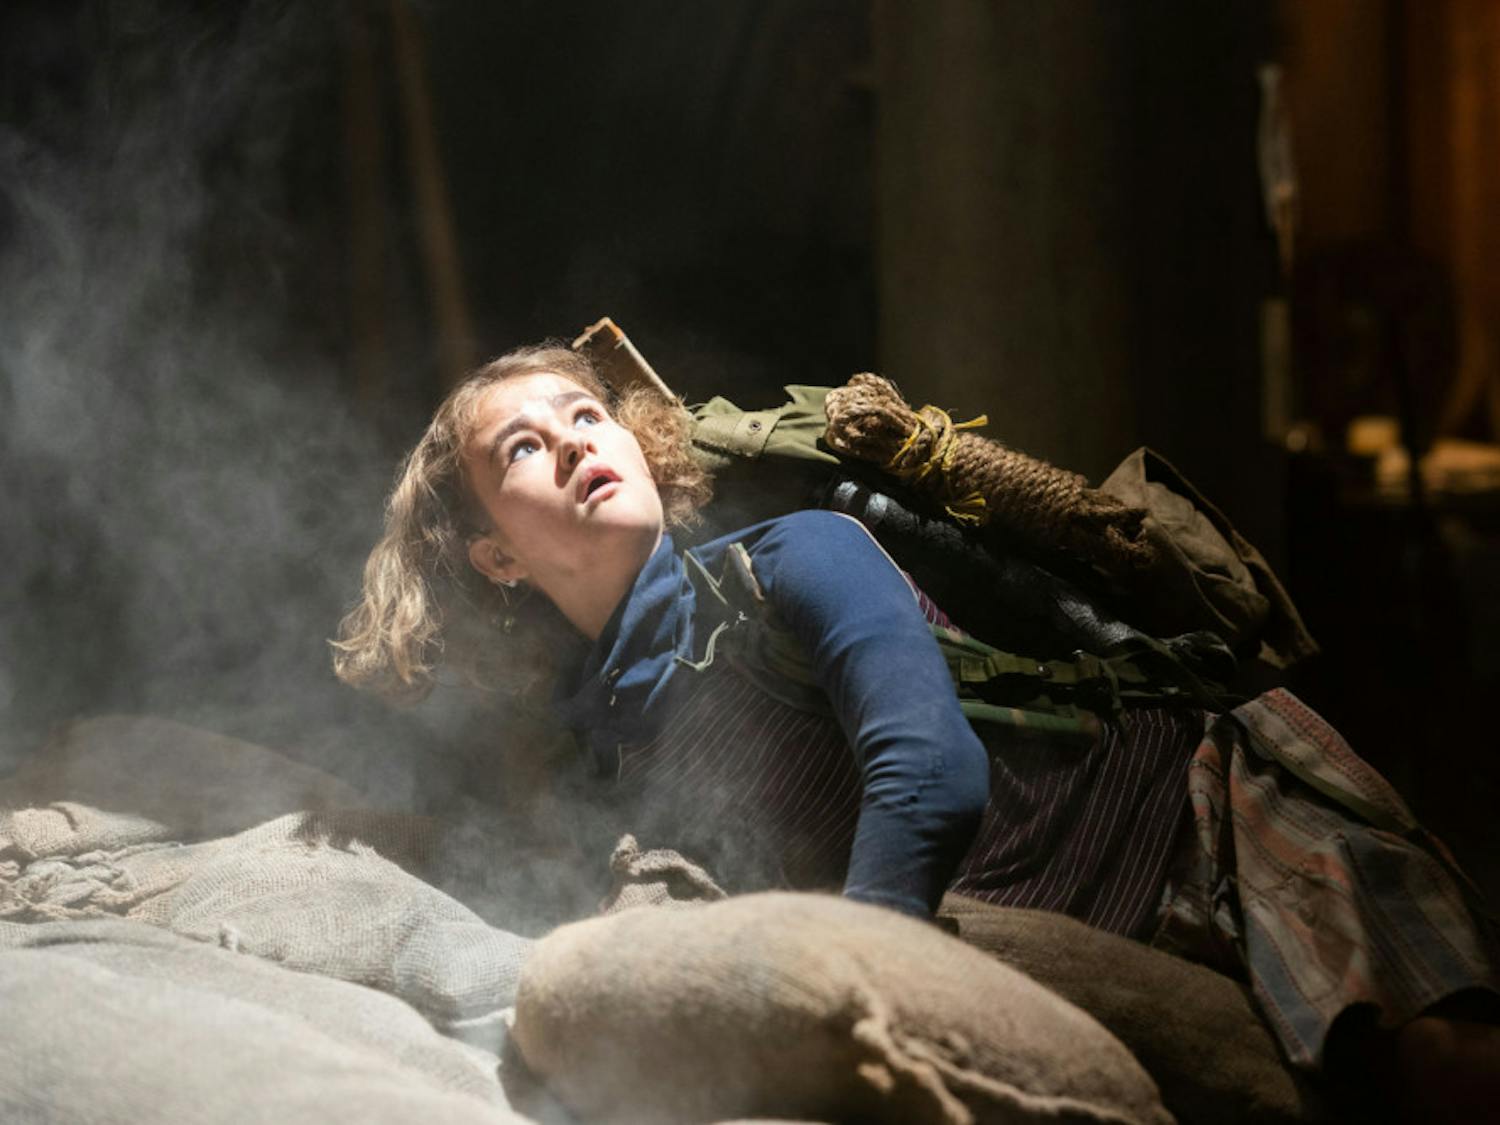 Regan (Millicent Simmonds) braves the unknown in "A Quiet Place Part II."